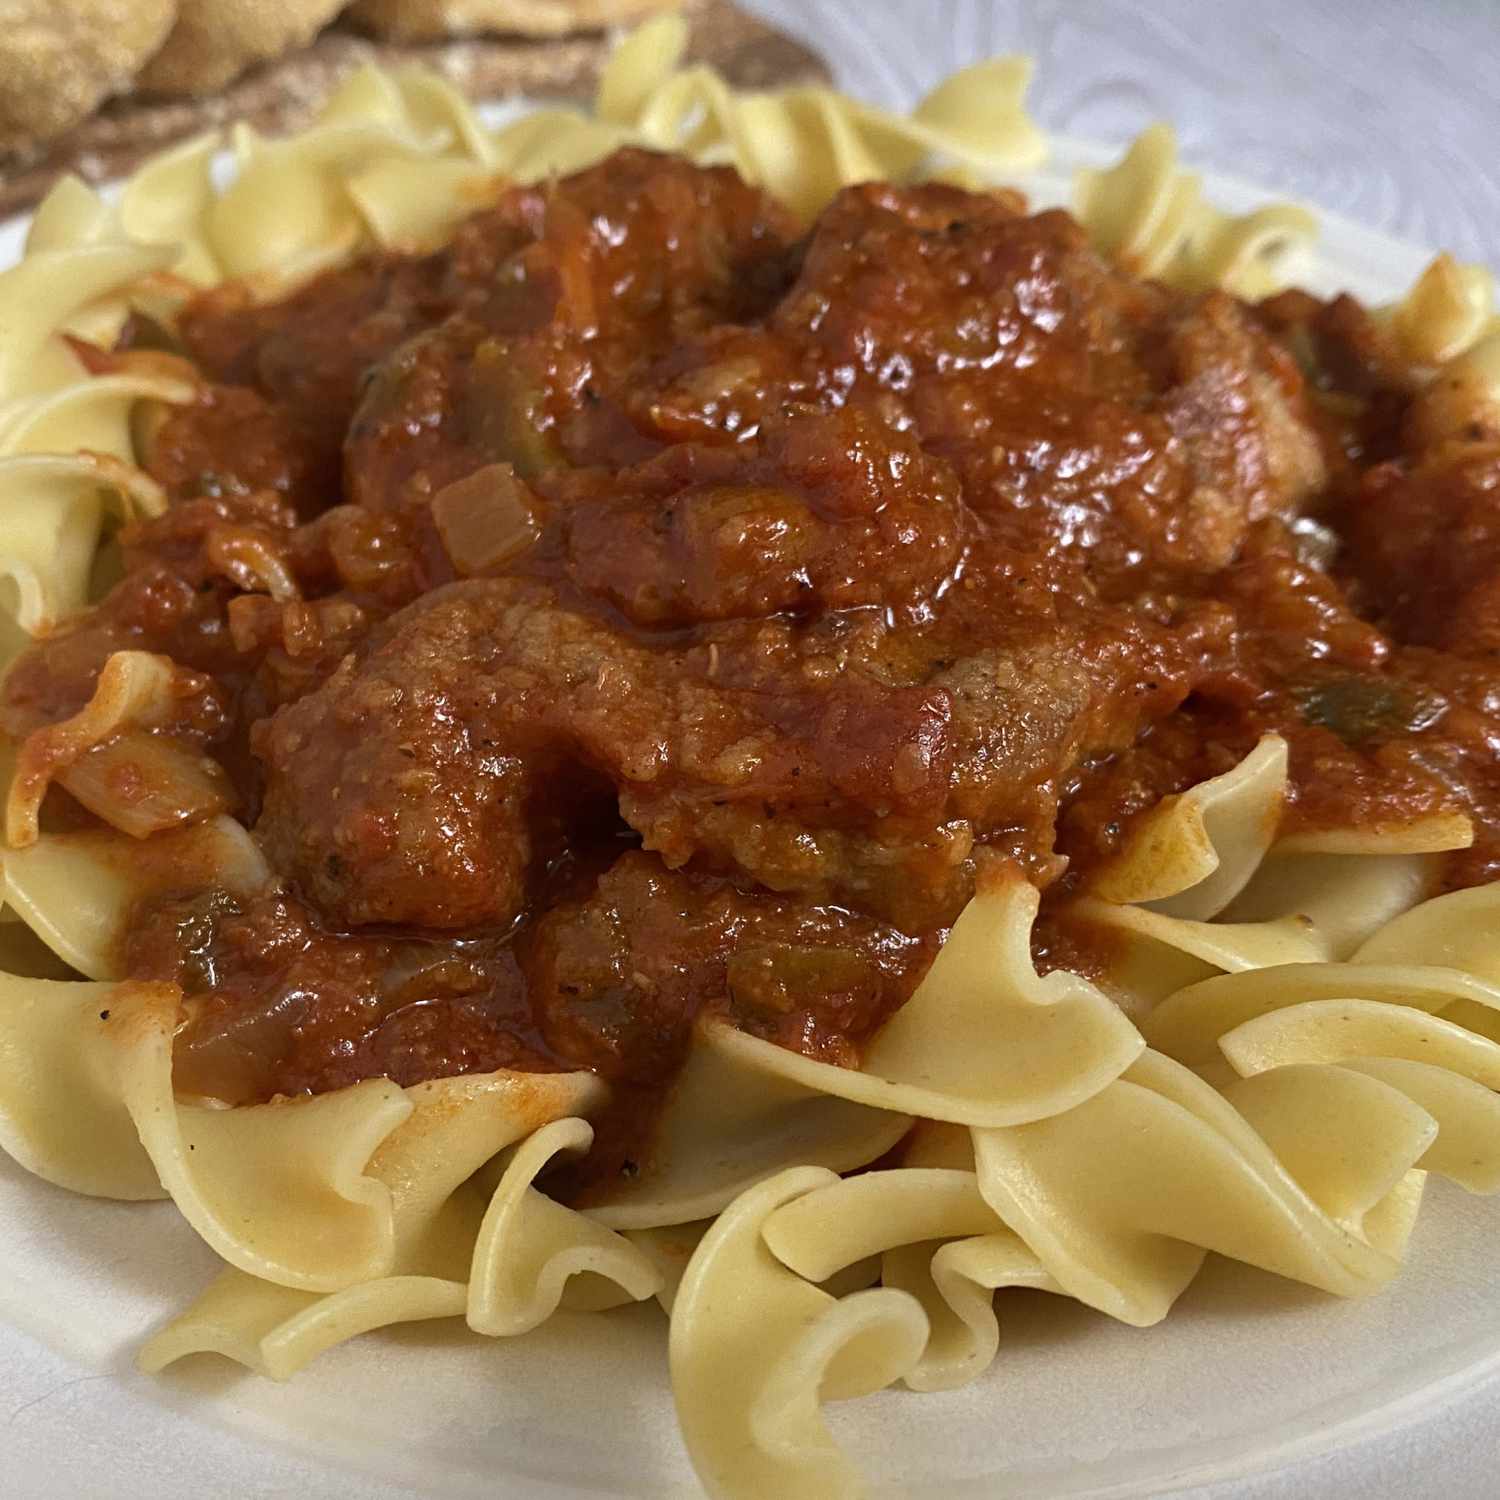 a plate in of beef cubes in tomato sauce served over egg noodles